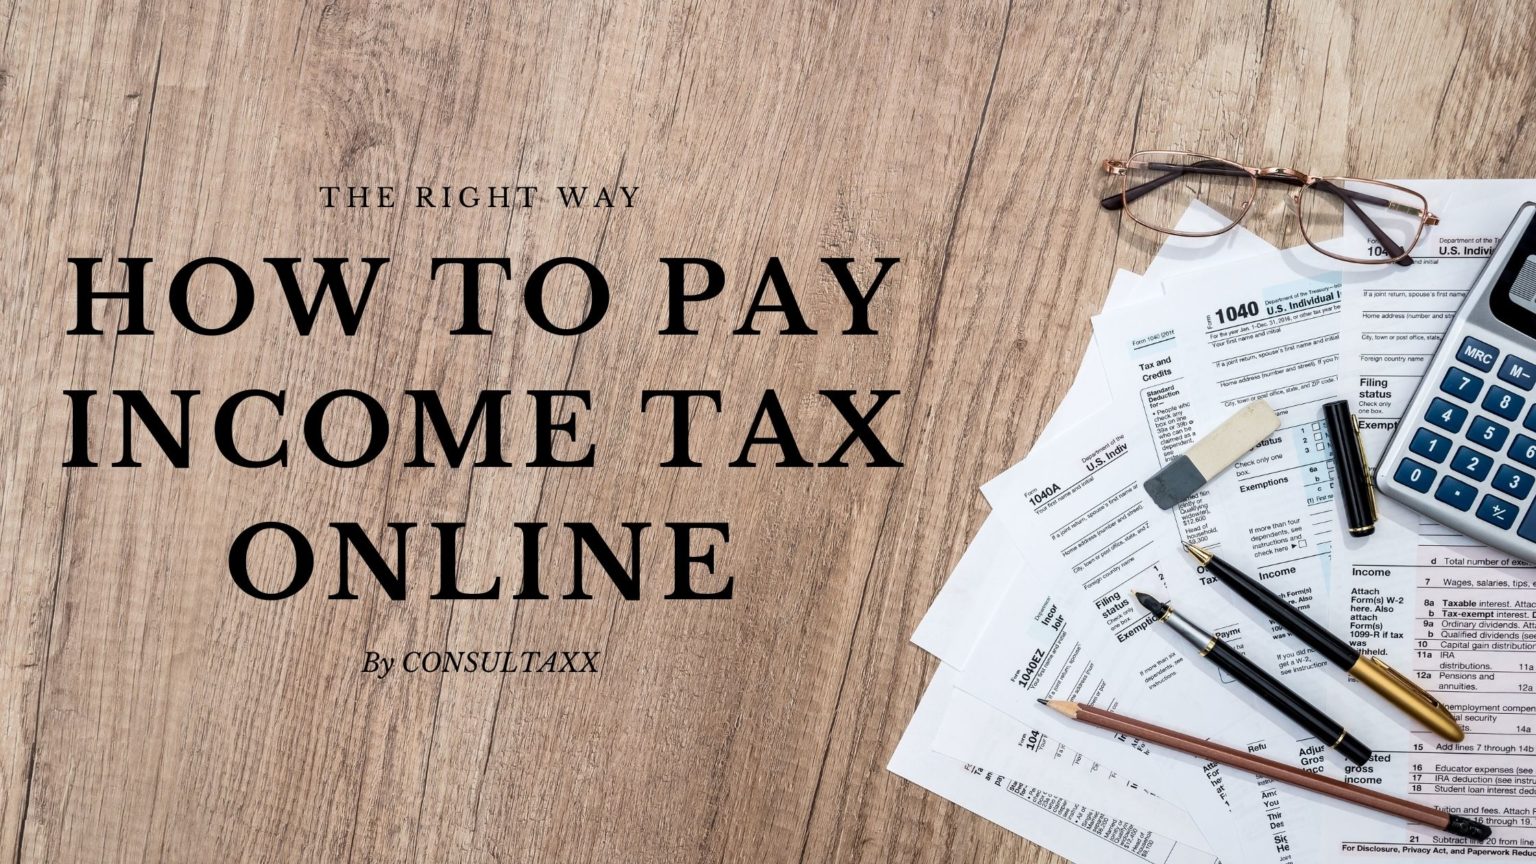 how-to-pay-income-tax-online-consultaxx